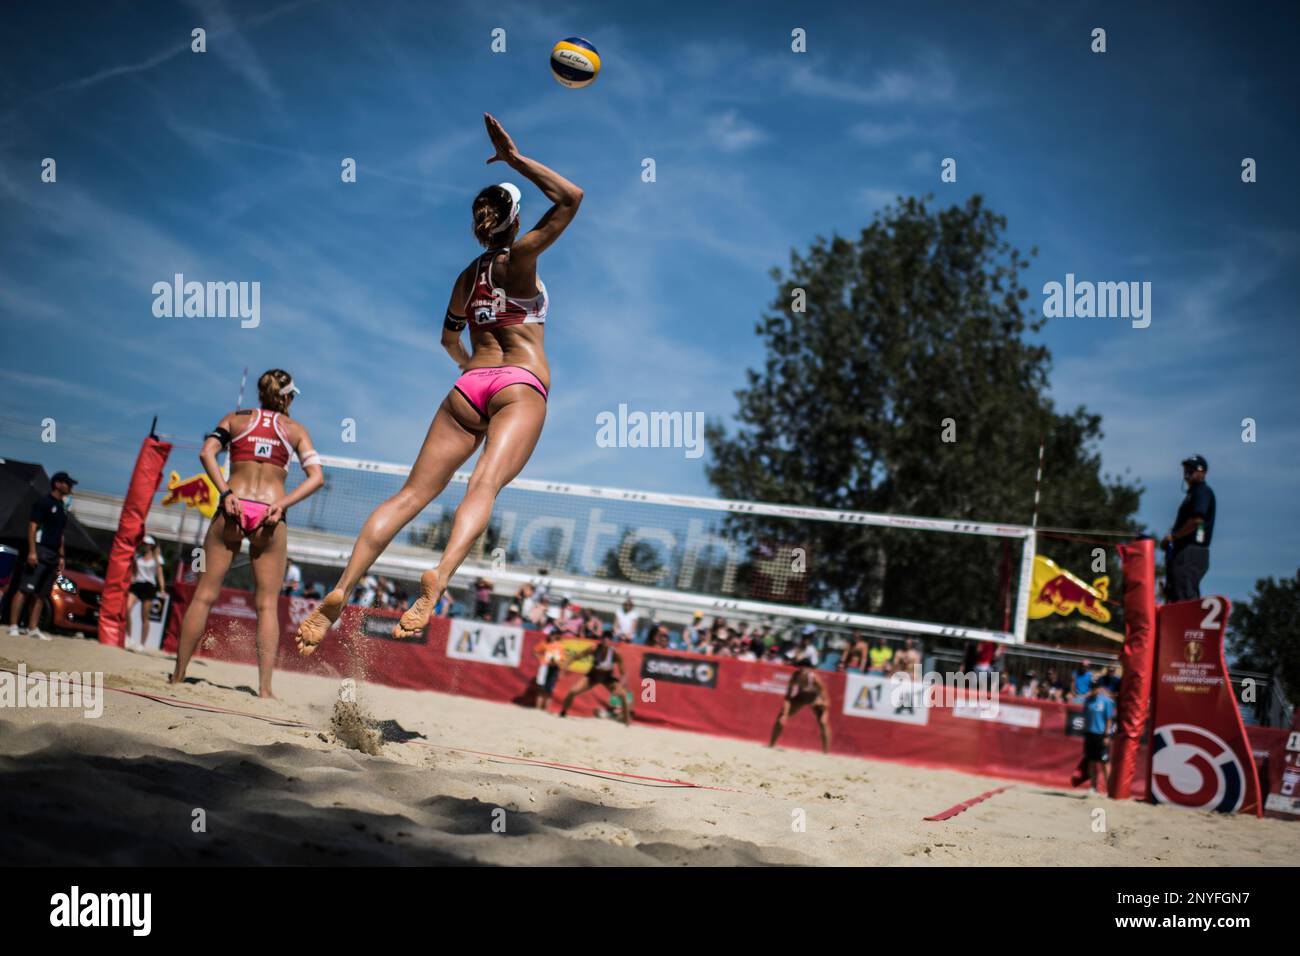 Tanja Hüberli and Nina Betschart of Switzerland compete against Brandie  Wilkerson and Heather Bansley of Canada during the Beach Volleyball World  Championships in Vienna, Austria on July 31, 2017. // Joerg Mitter/